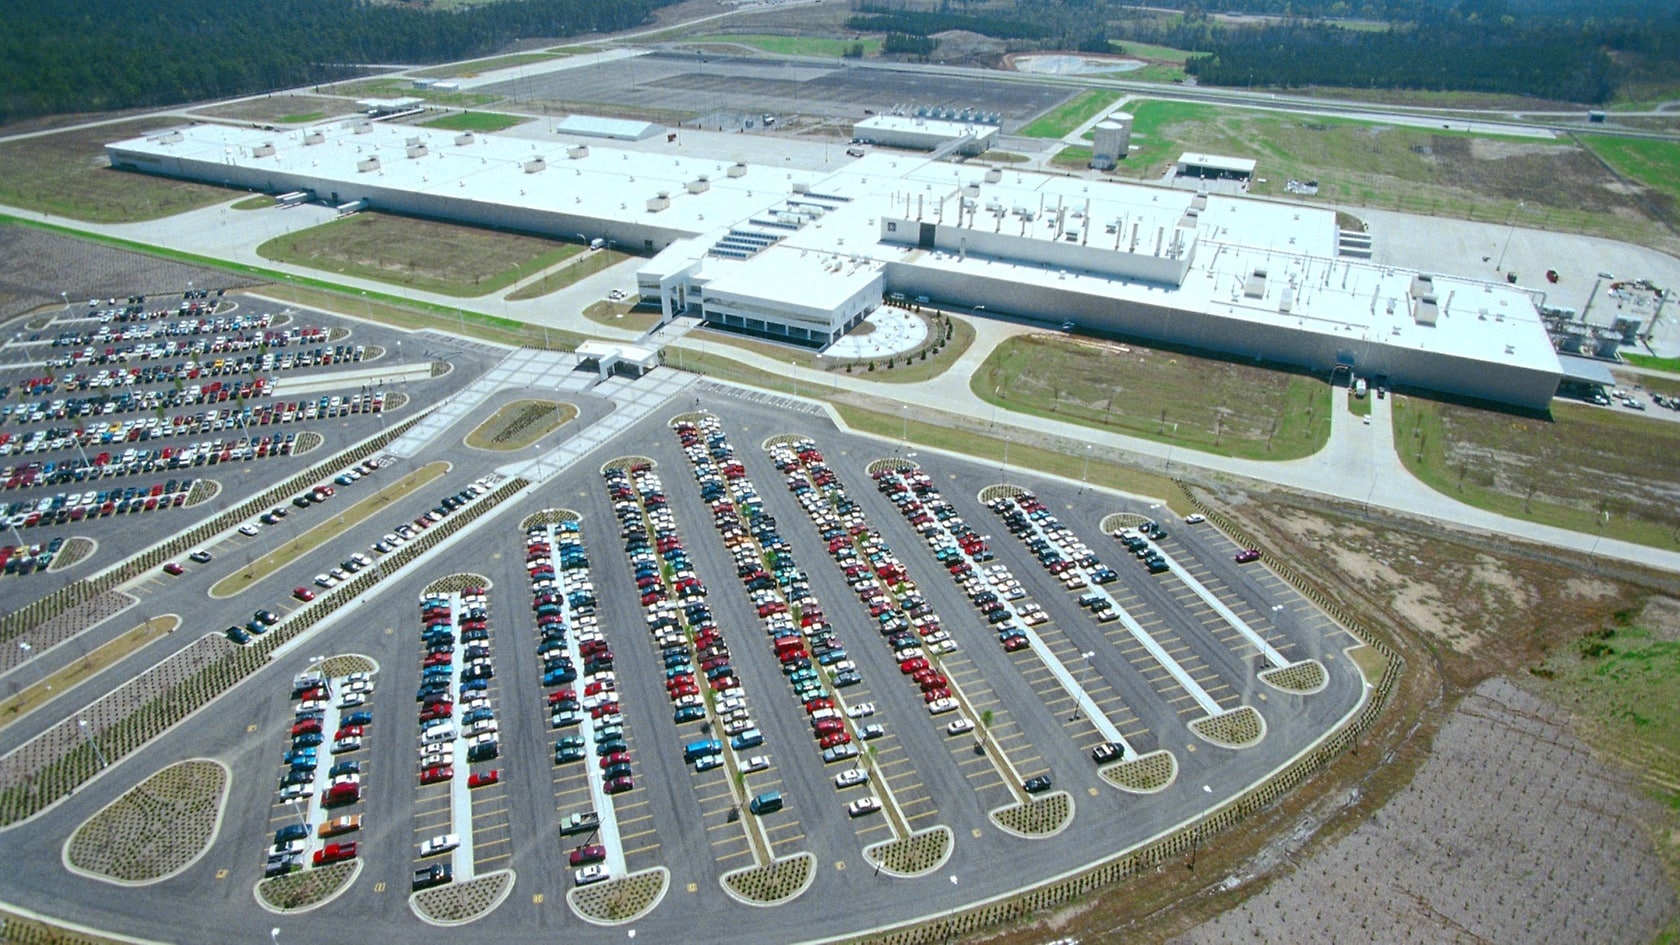 Built for the M-Class: The Mercedes-Benz plant in Tuscaloosa, Alabama/USA.